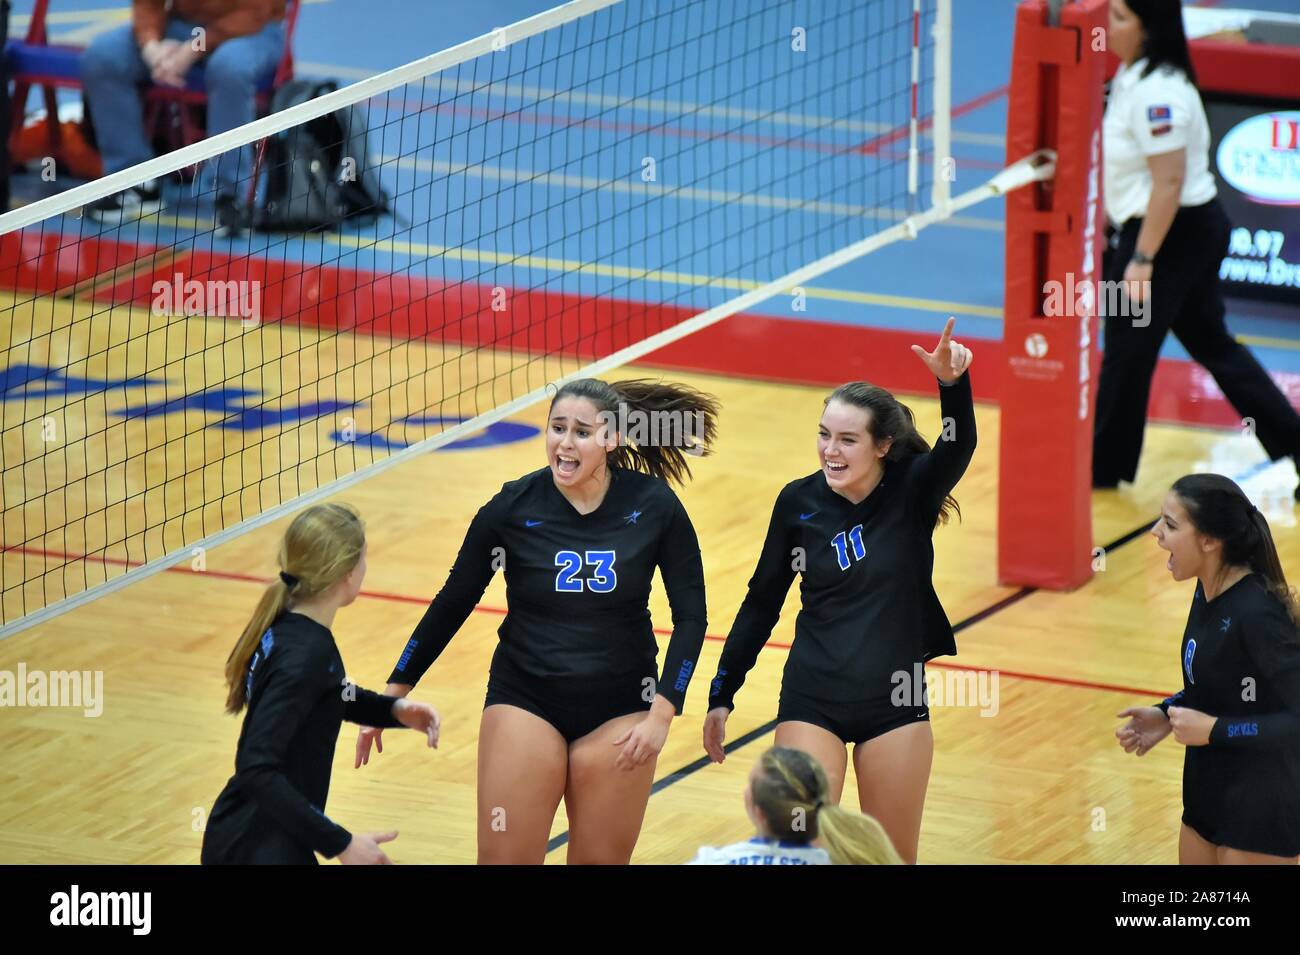 Teammates react and celebrate a hard earned point in a volleyball playoff match. USA. Stock Photo